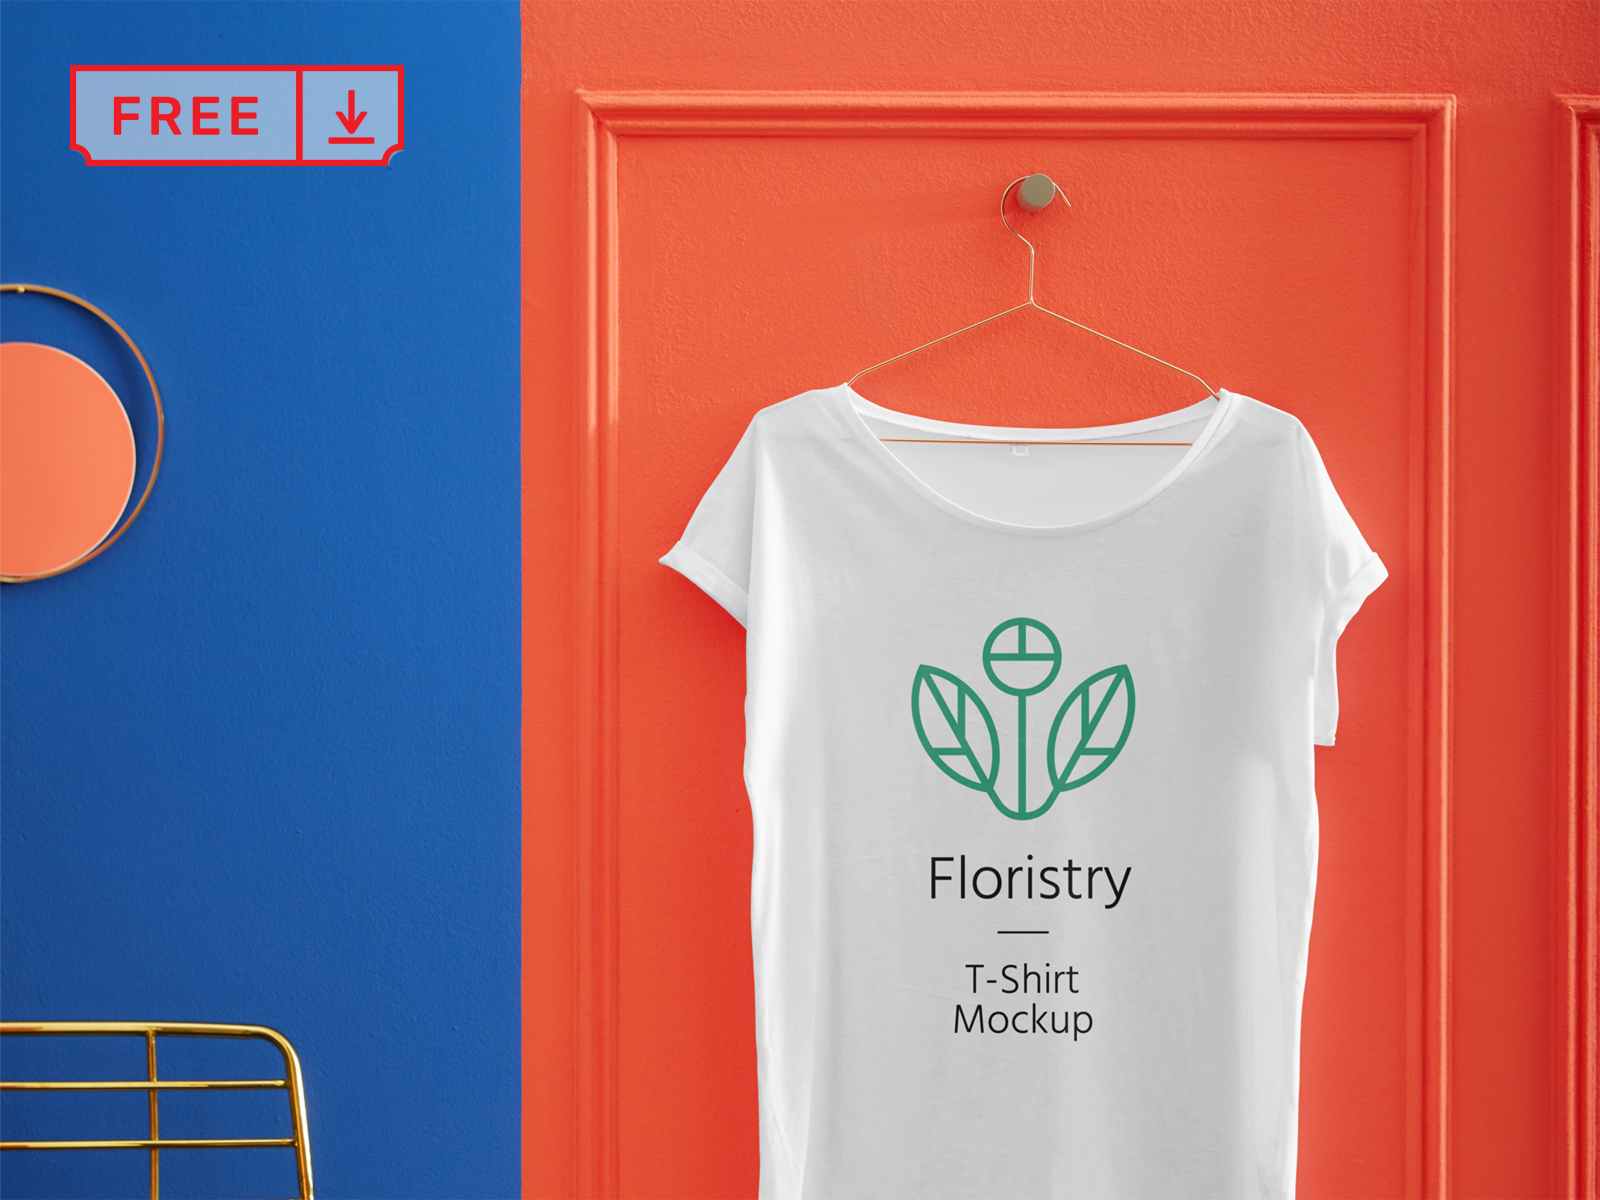 Download Free Hanging T Shirt PSD Mockup by Mr.Mockup™ on Dribbble